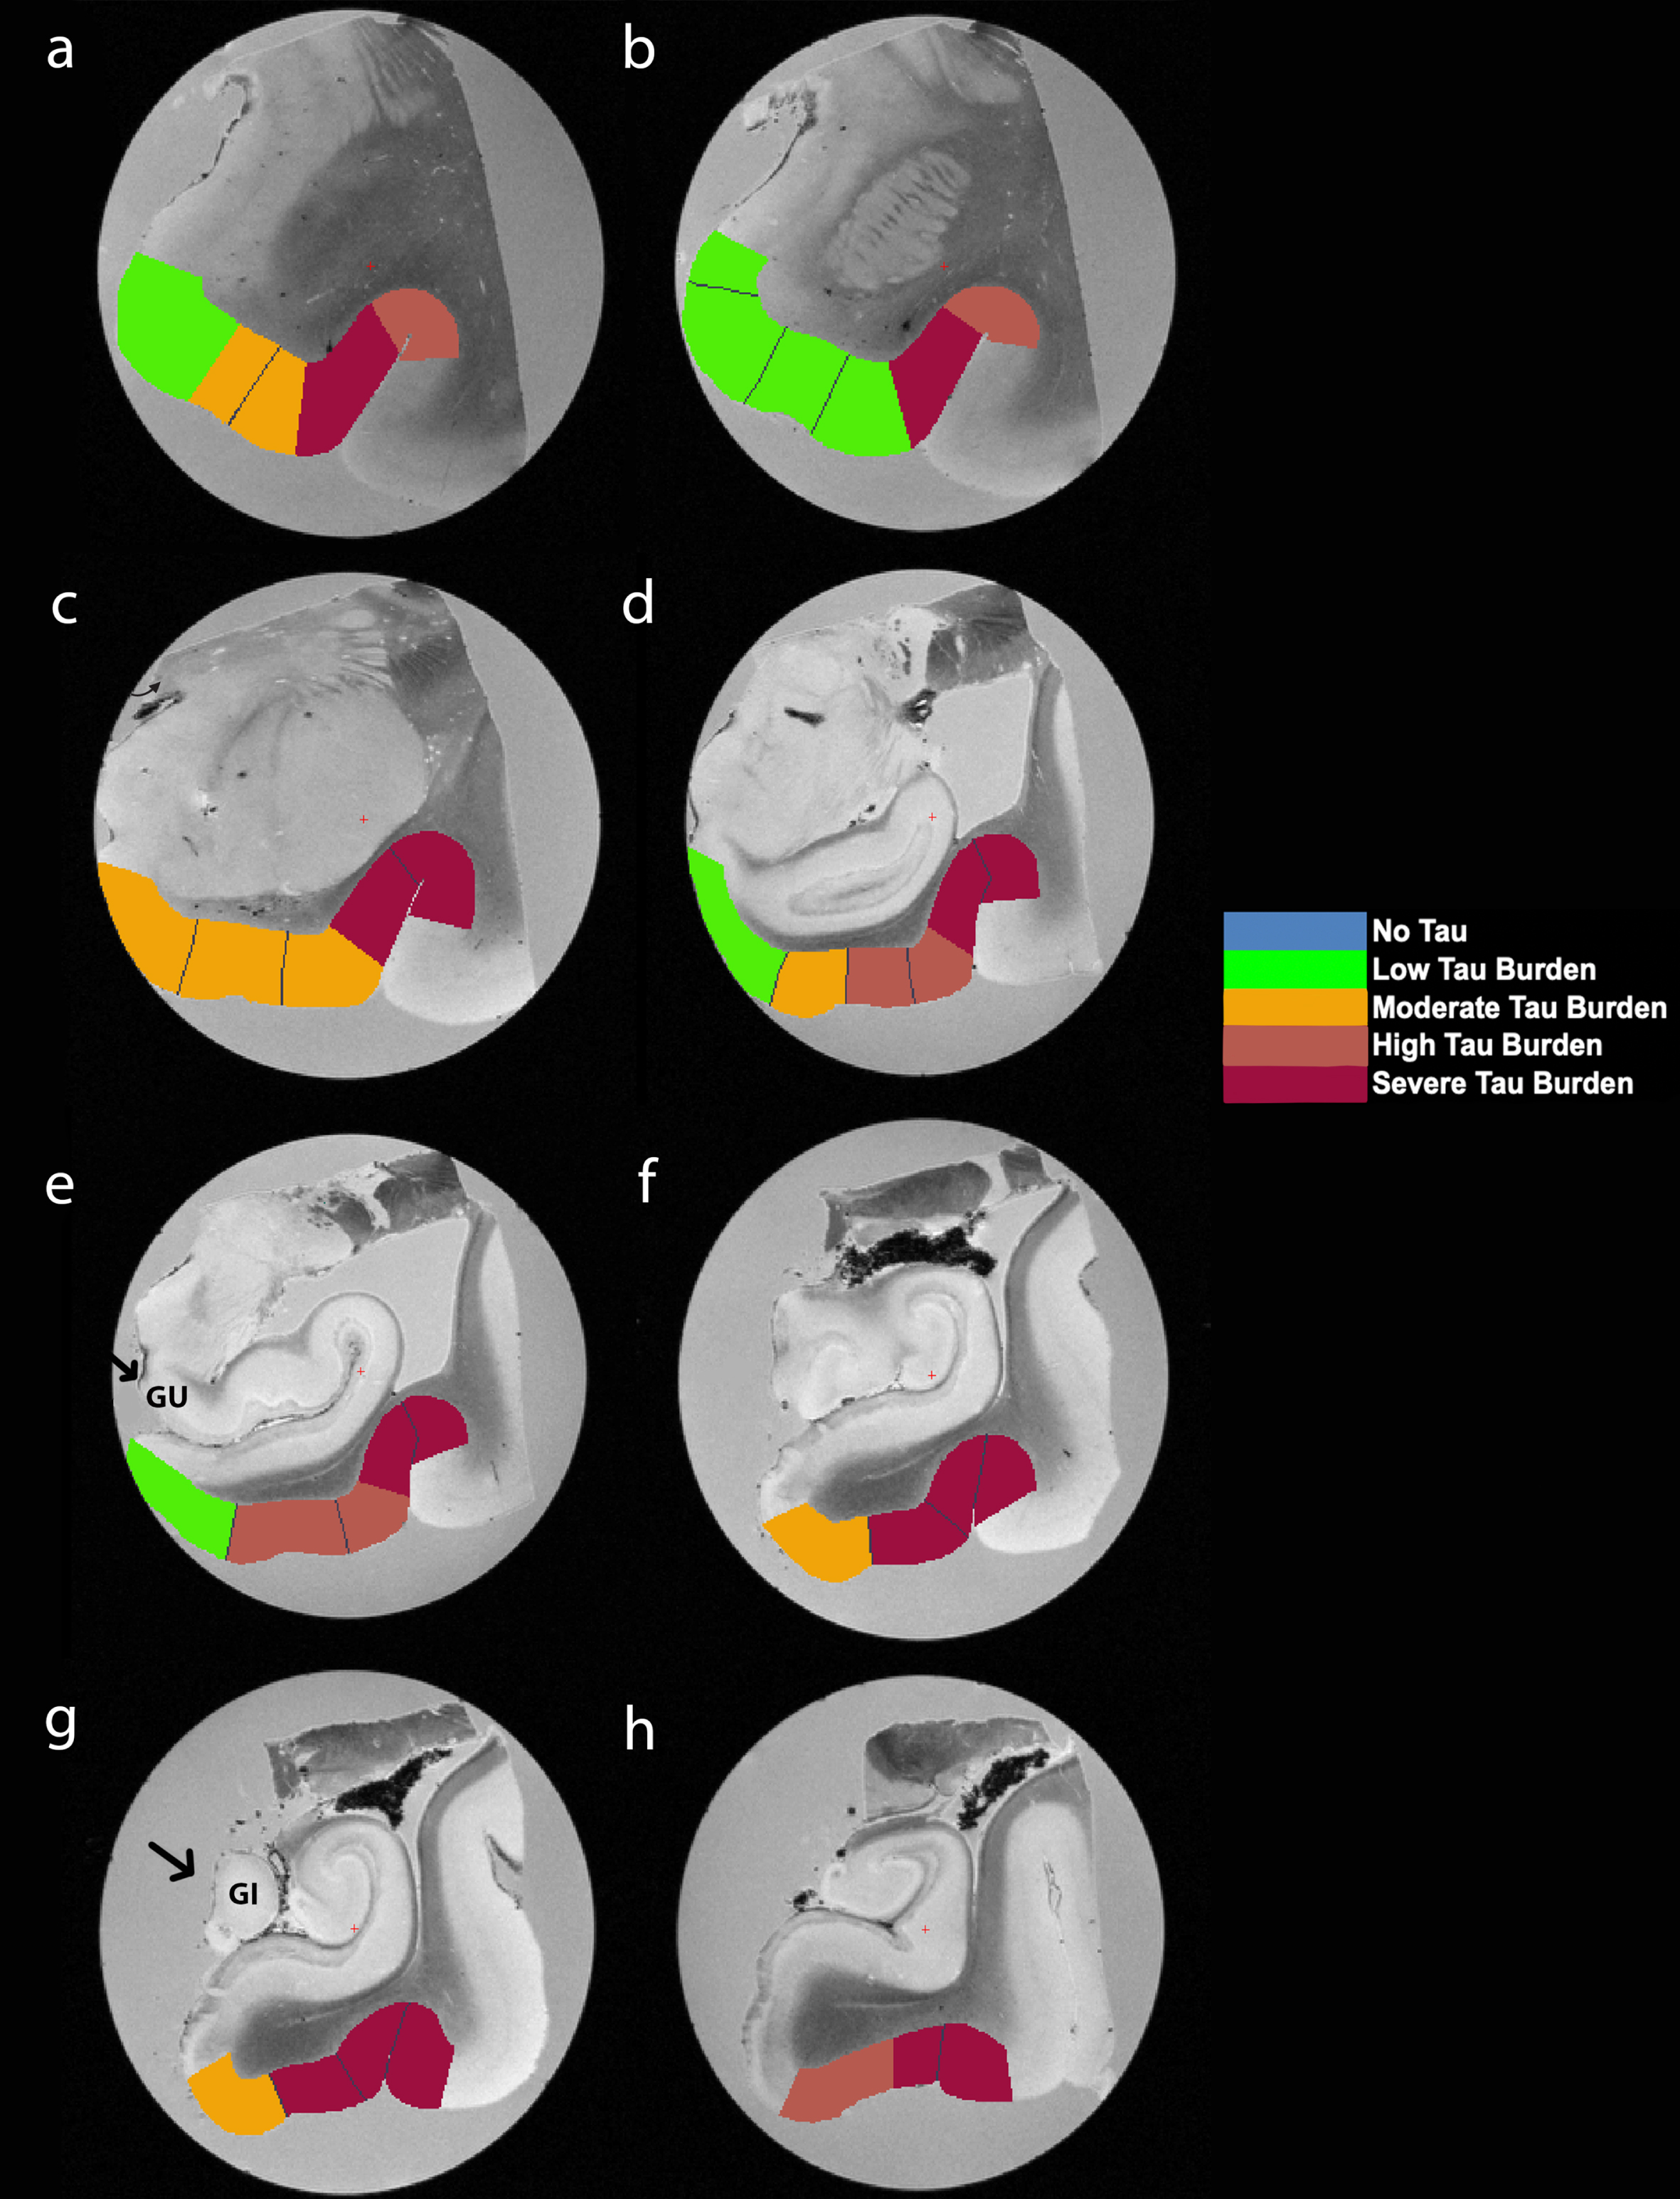 Manually Labeled Ex Vivo MRI: Semi-quantitative tau burden scores manually labeled on eight anterior-posterior levels (panels a-h) of a single case (case 6, Braak and Braak II). Labeled colors reflect corresponding semi-quantitative tau burden scores from Fig. 4. Blue labeling (score 0) means no CP13 tau pathology, no NFTs, no NTs. Green labeling (score 1) means very low tau/NFT burden and essentially isolated tangles in this region. Note that the green labels were restricted to medial and anterior subregions. Orange (score 2) conveys a moderate tau burden both in number of NFTs and NFT packing density. Rust (score 3) translated to a high tau burden and showed more densely packed and strongly stained NFTs and pretangles with substantial NTs. Burgundy (score 4) showed the greatest density for phosphorylated tau at CP13, with a large number of closely packed, immunostained NFTs and NTs blanketing most of the area. Black arrows point to the gyrus uncinatus (e) and the gyrus intralimbicus (g).